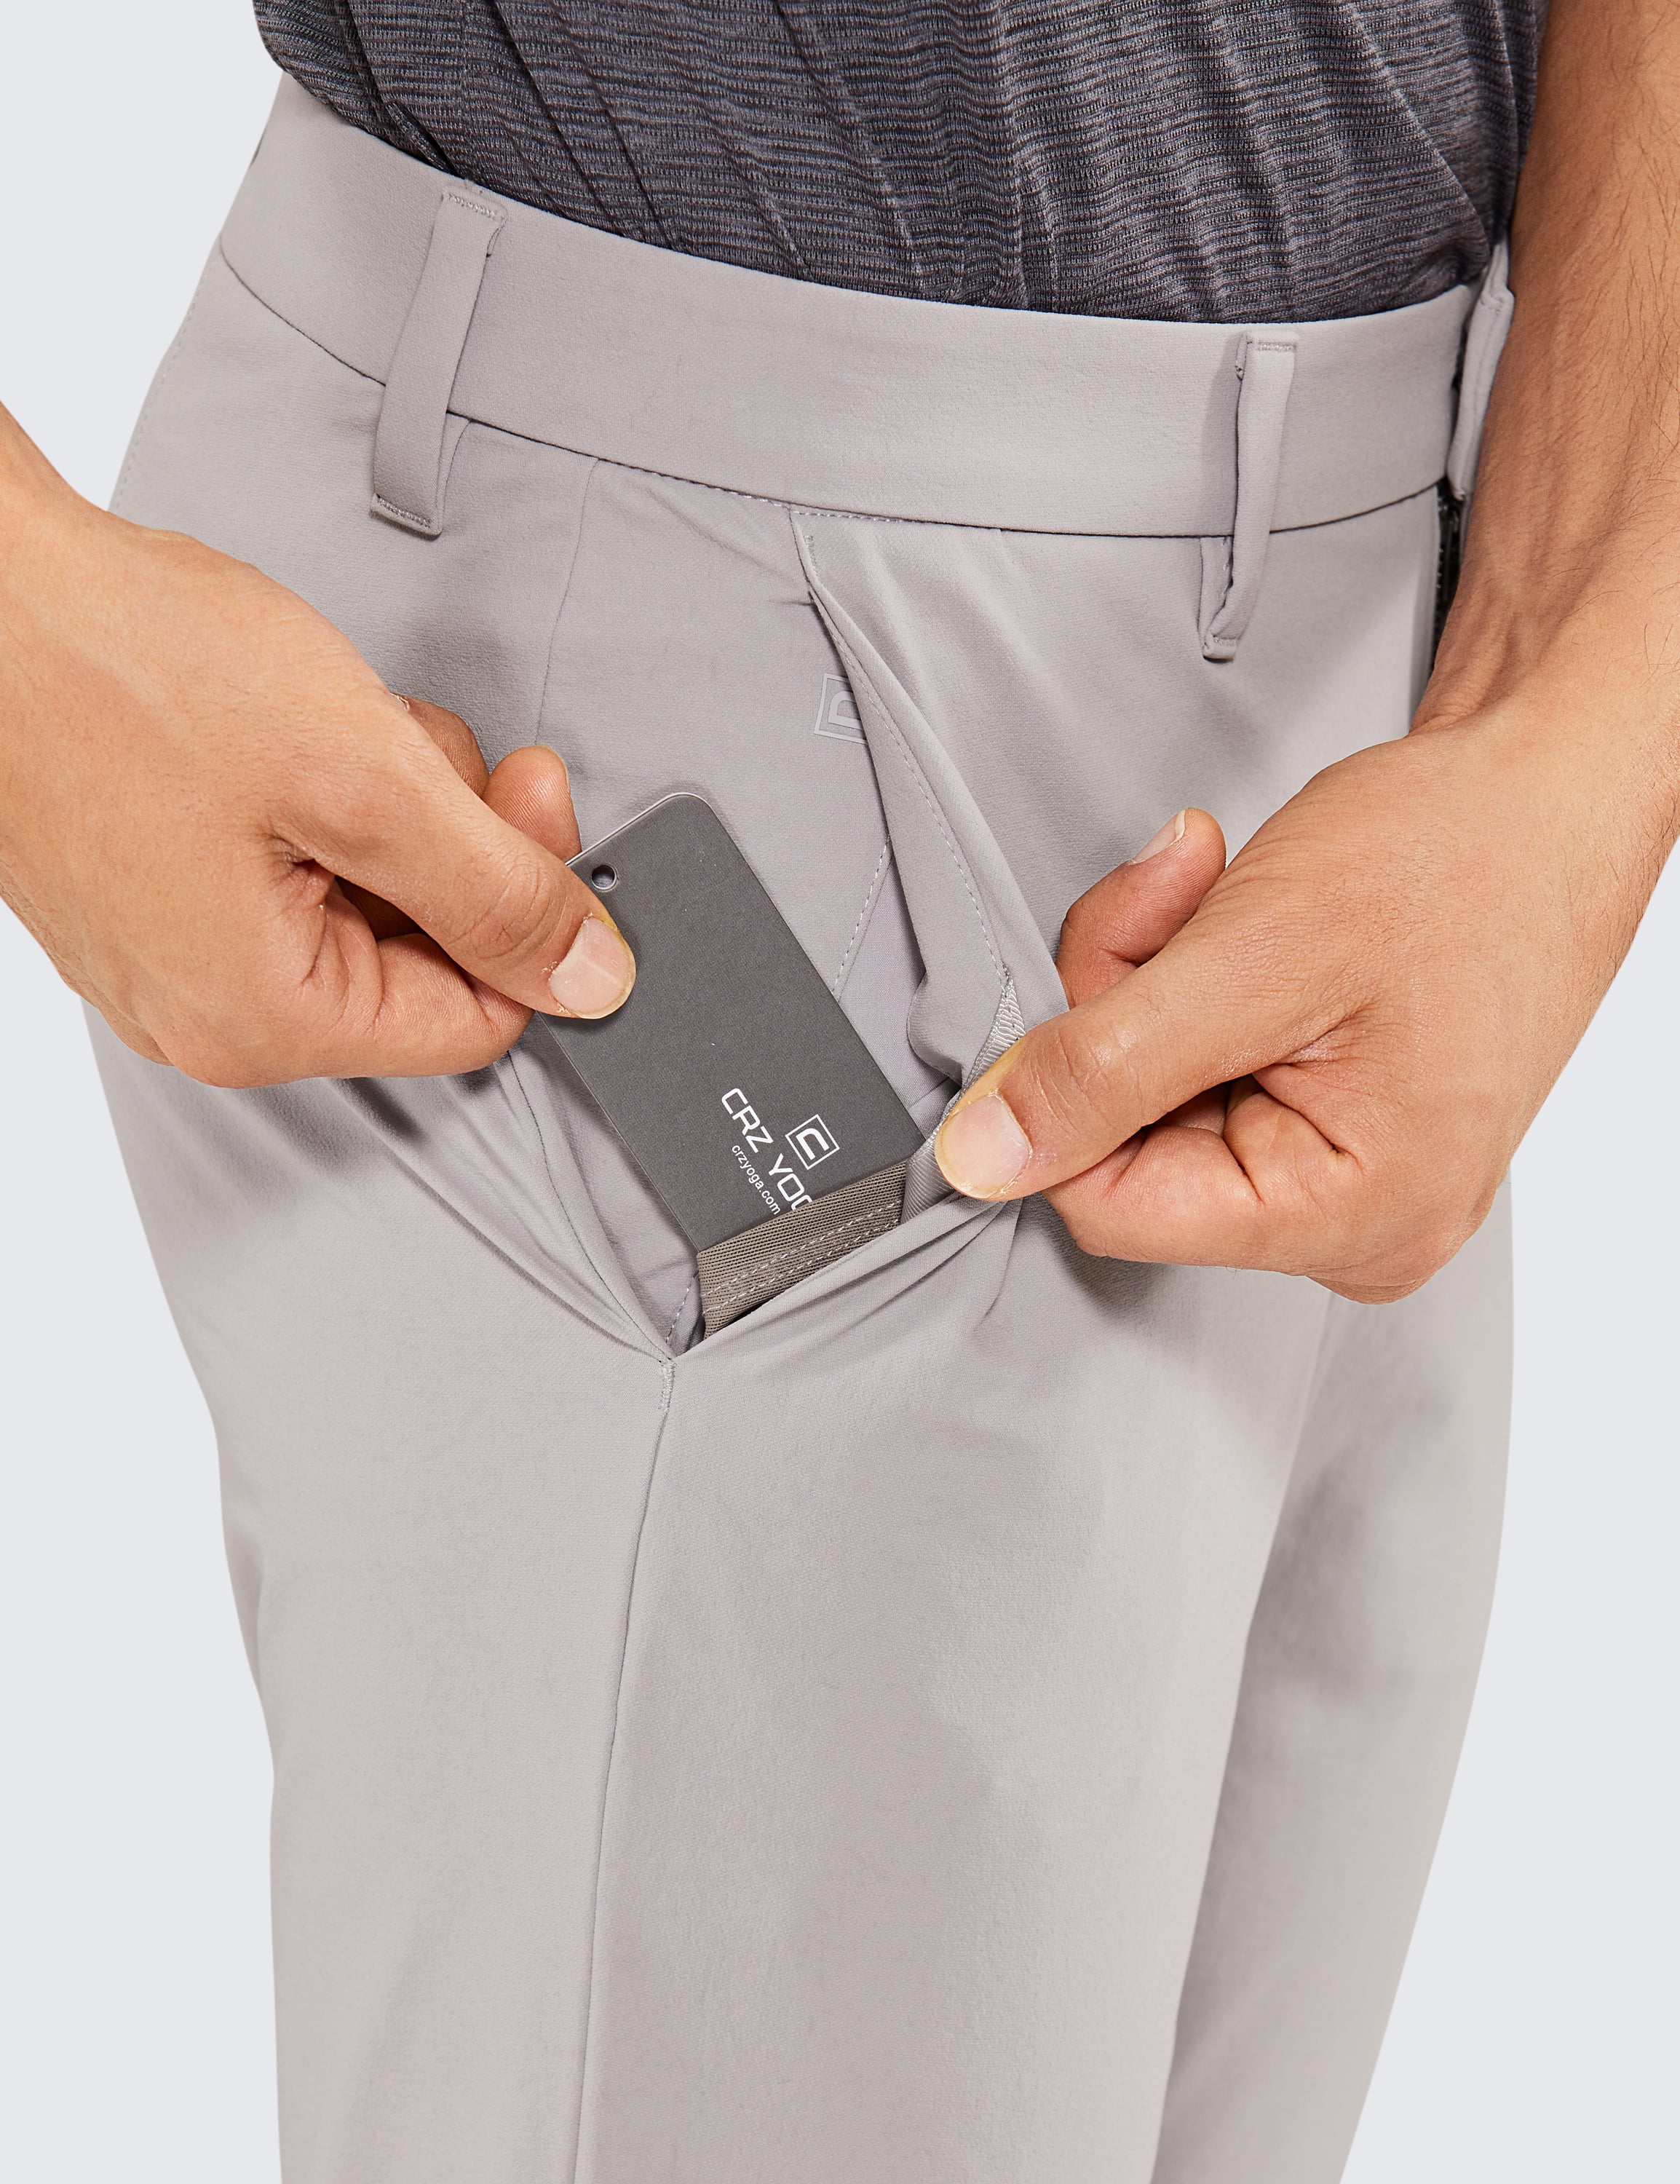 CRZ YOGA Men's Travel Pants - 32''/34'' Slim - Stretch Quick Dry Thick Golf  Work Pant with Pockets 